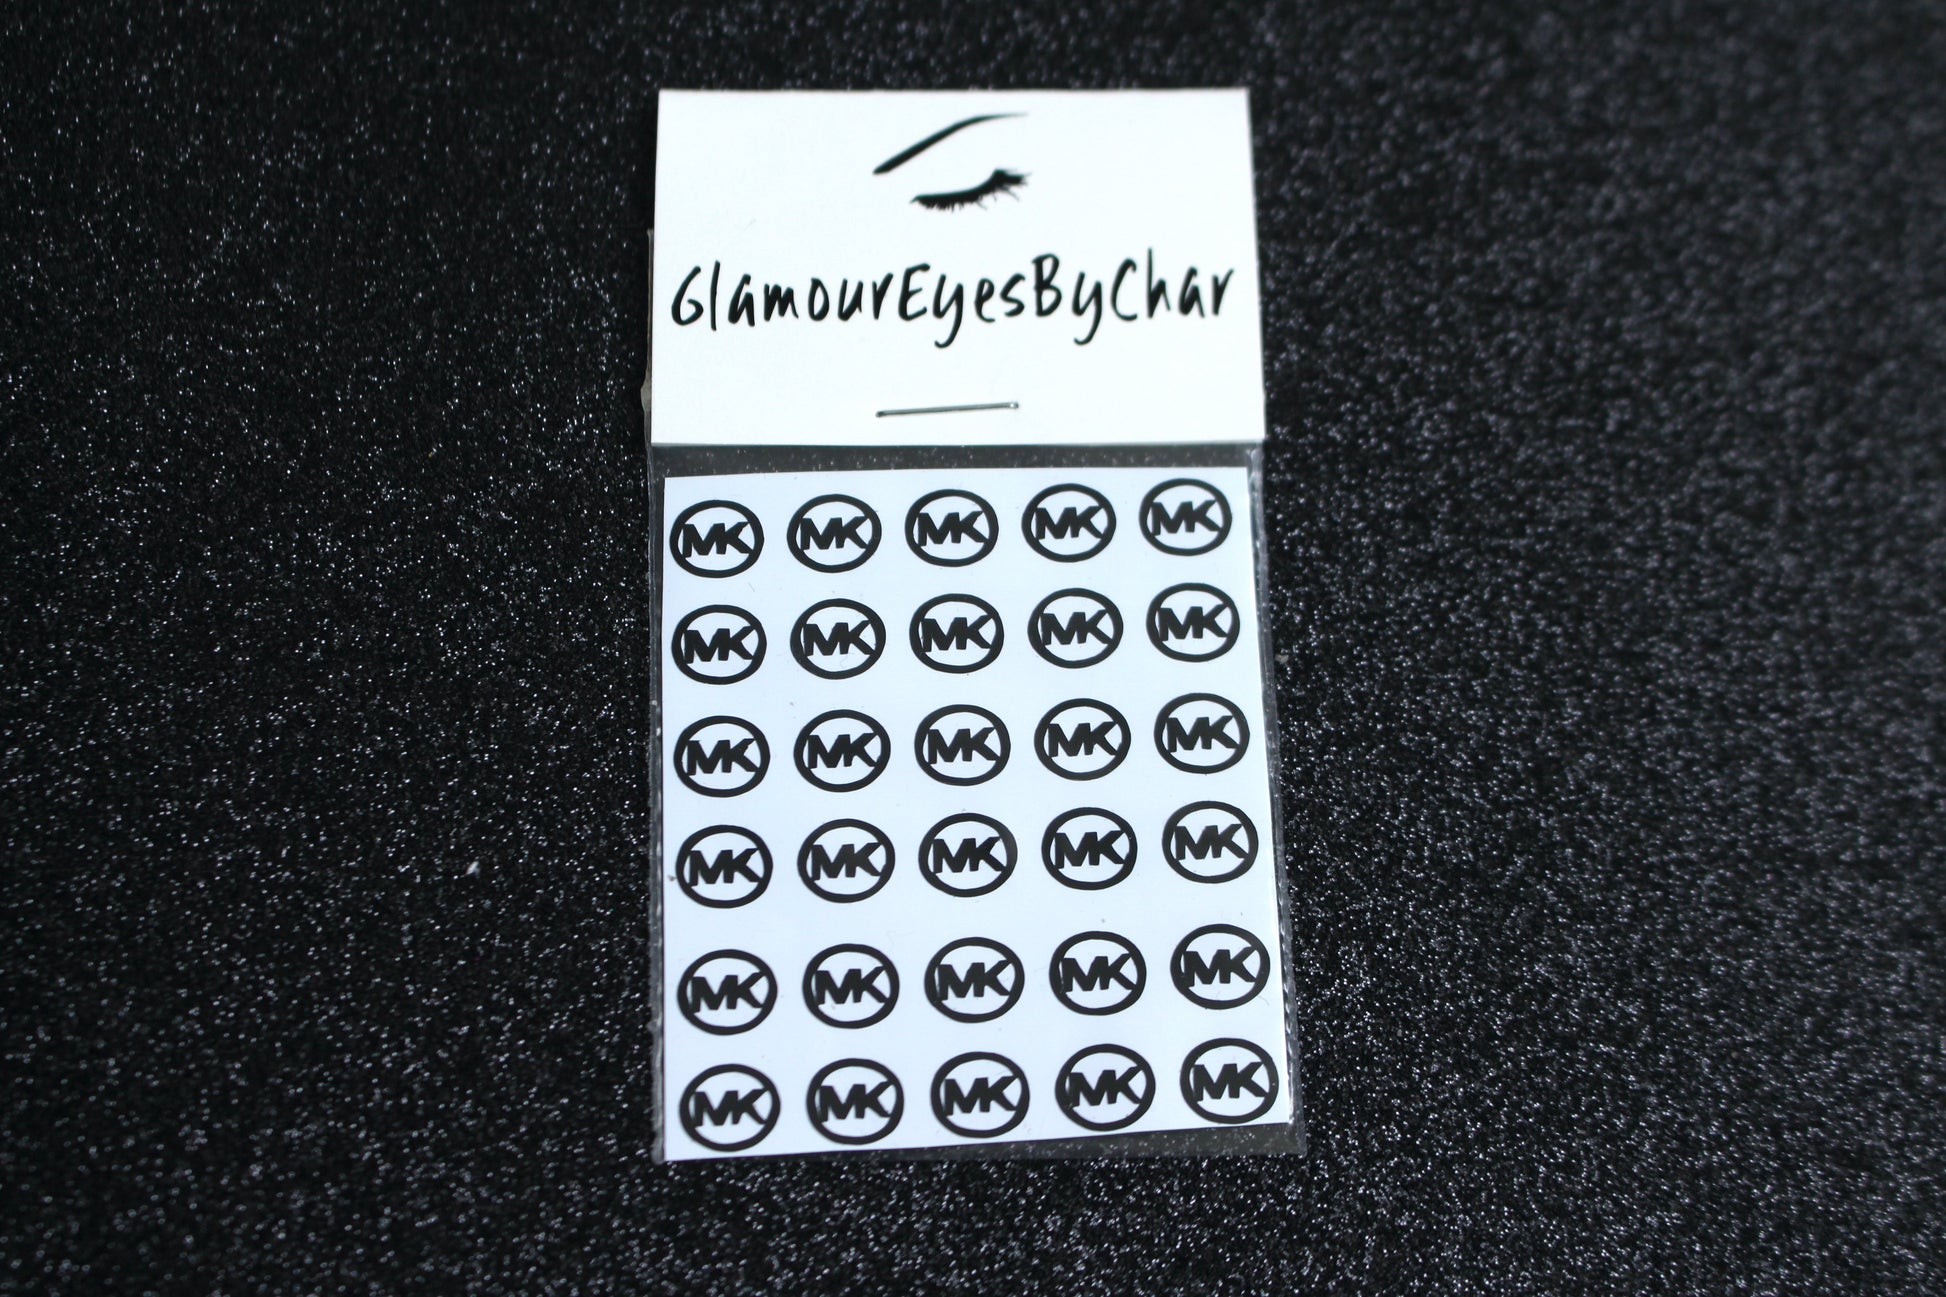 Spice up your nails with these unique MK designer inspired nail decals. They can be used on natural or acrylic nails. You can also apply them on top of regular or gel/shellac nail polish. These handmade decals can also be used for body art or any DIY project. The pack contains 30 decals and is available in 4 different colours.   Size: ﻿W= 0.323 inches, H= 0.297 inches  Tip: Apply some of our glitter on your nails to really GLAMOUREYES your look.  